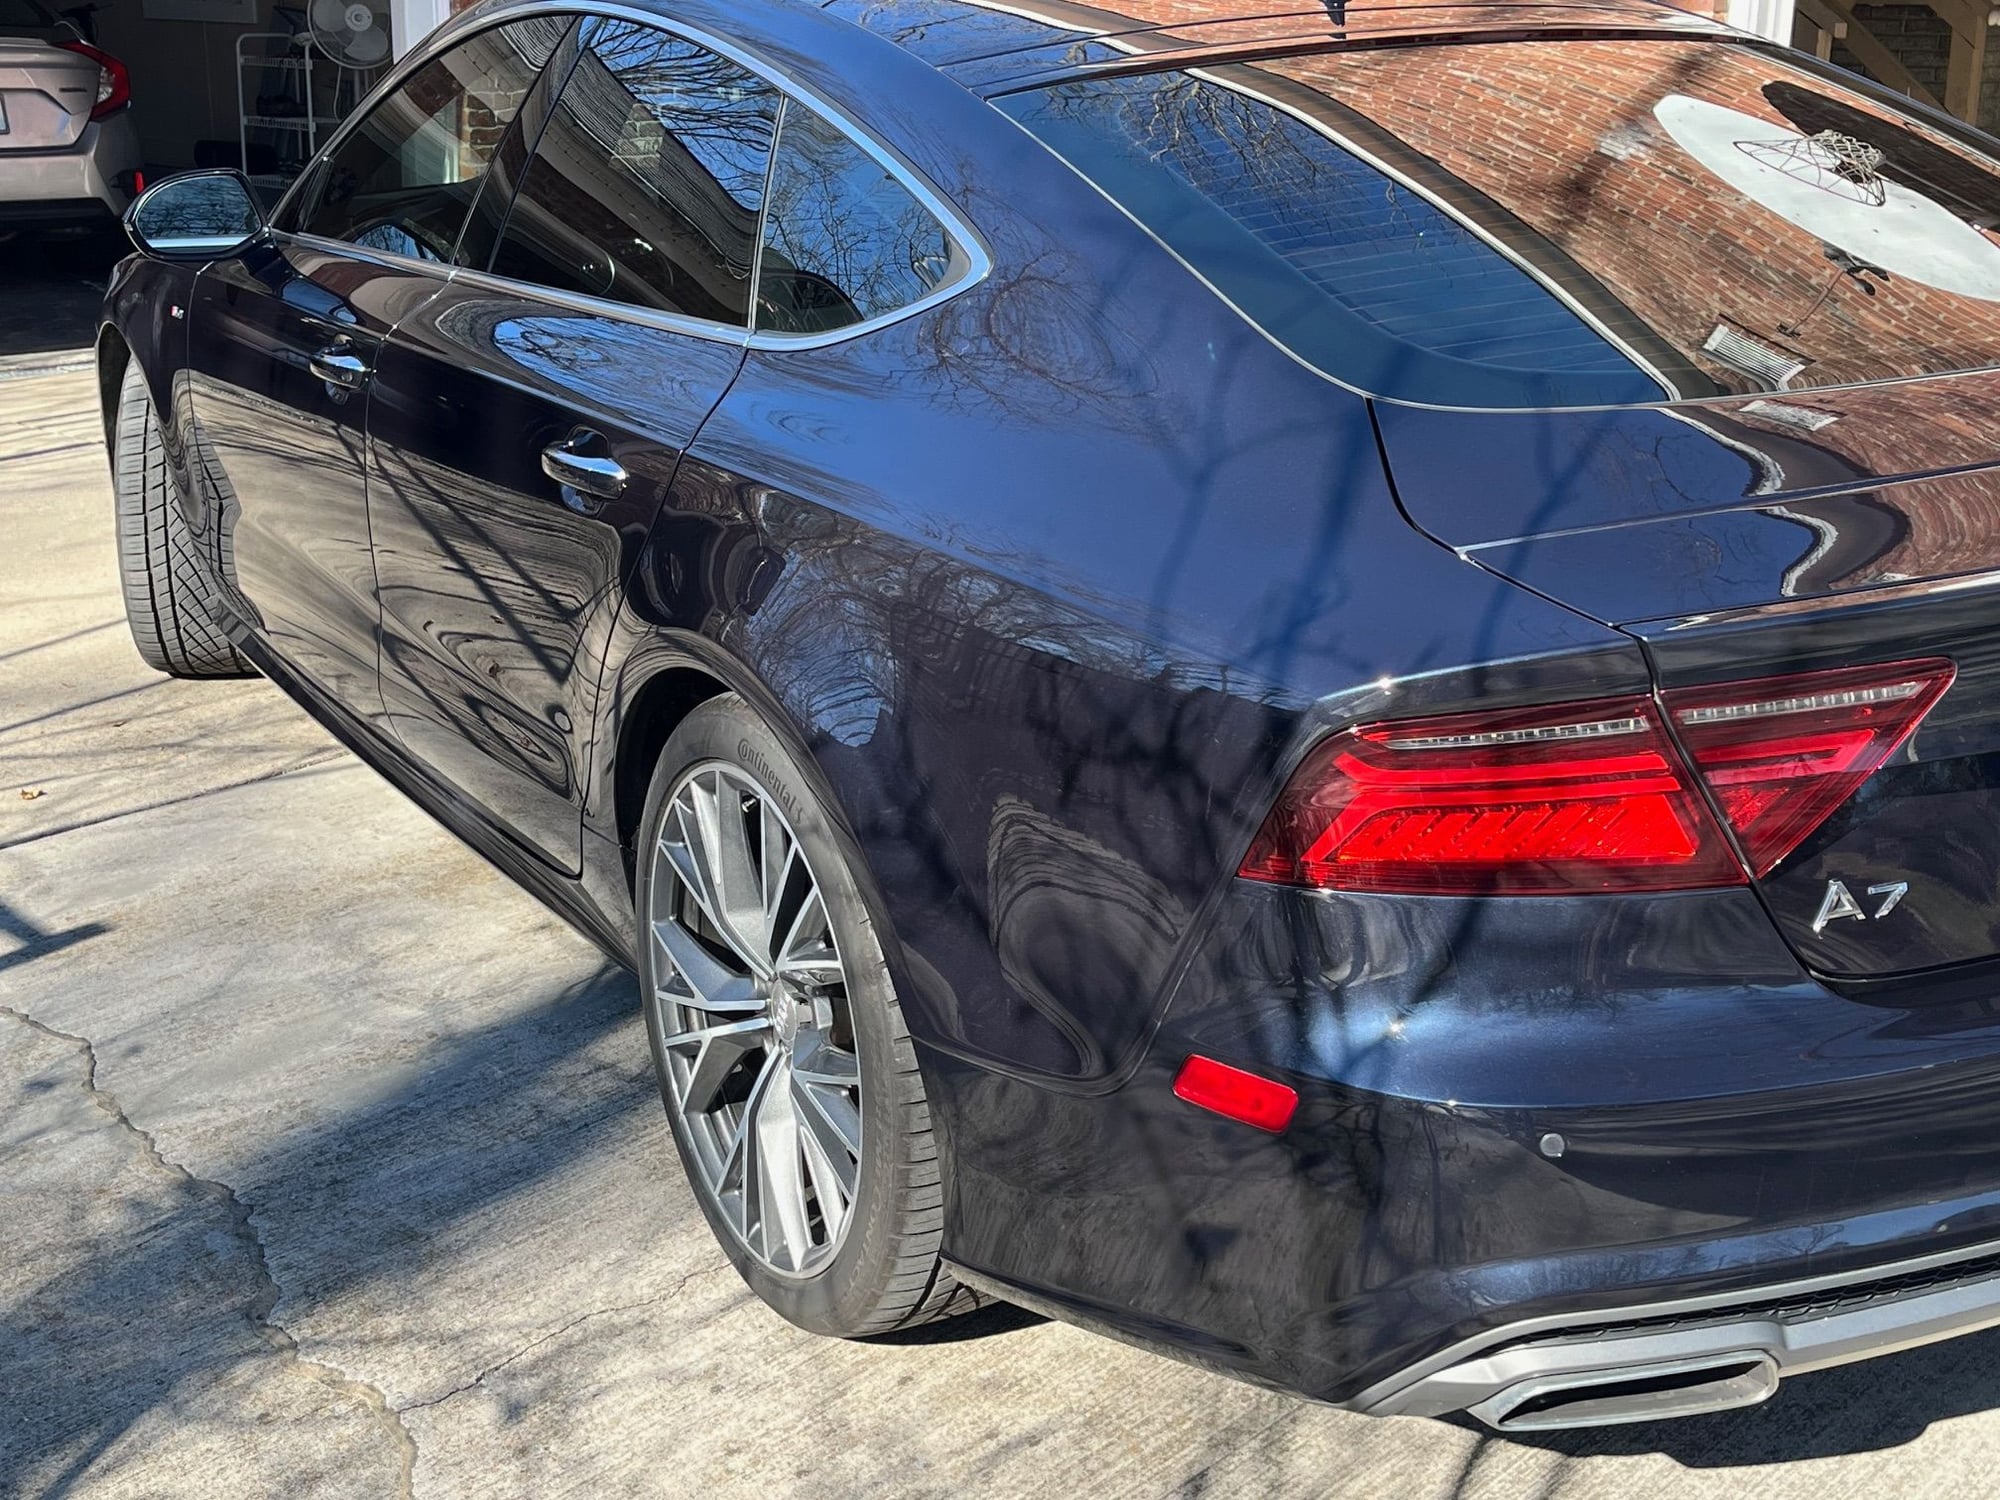 2016 Audi A7 Quattro - 2016 Audi A7 TDI Premium Plus - one of the last sold new in the USA - Used - Lexington, KY 40502, United States